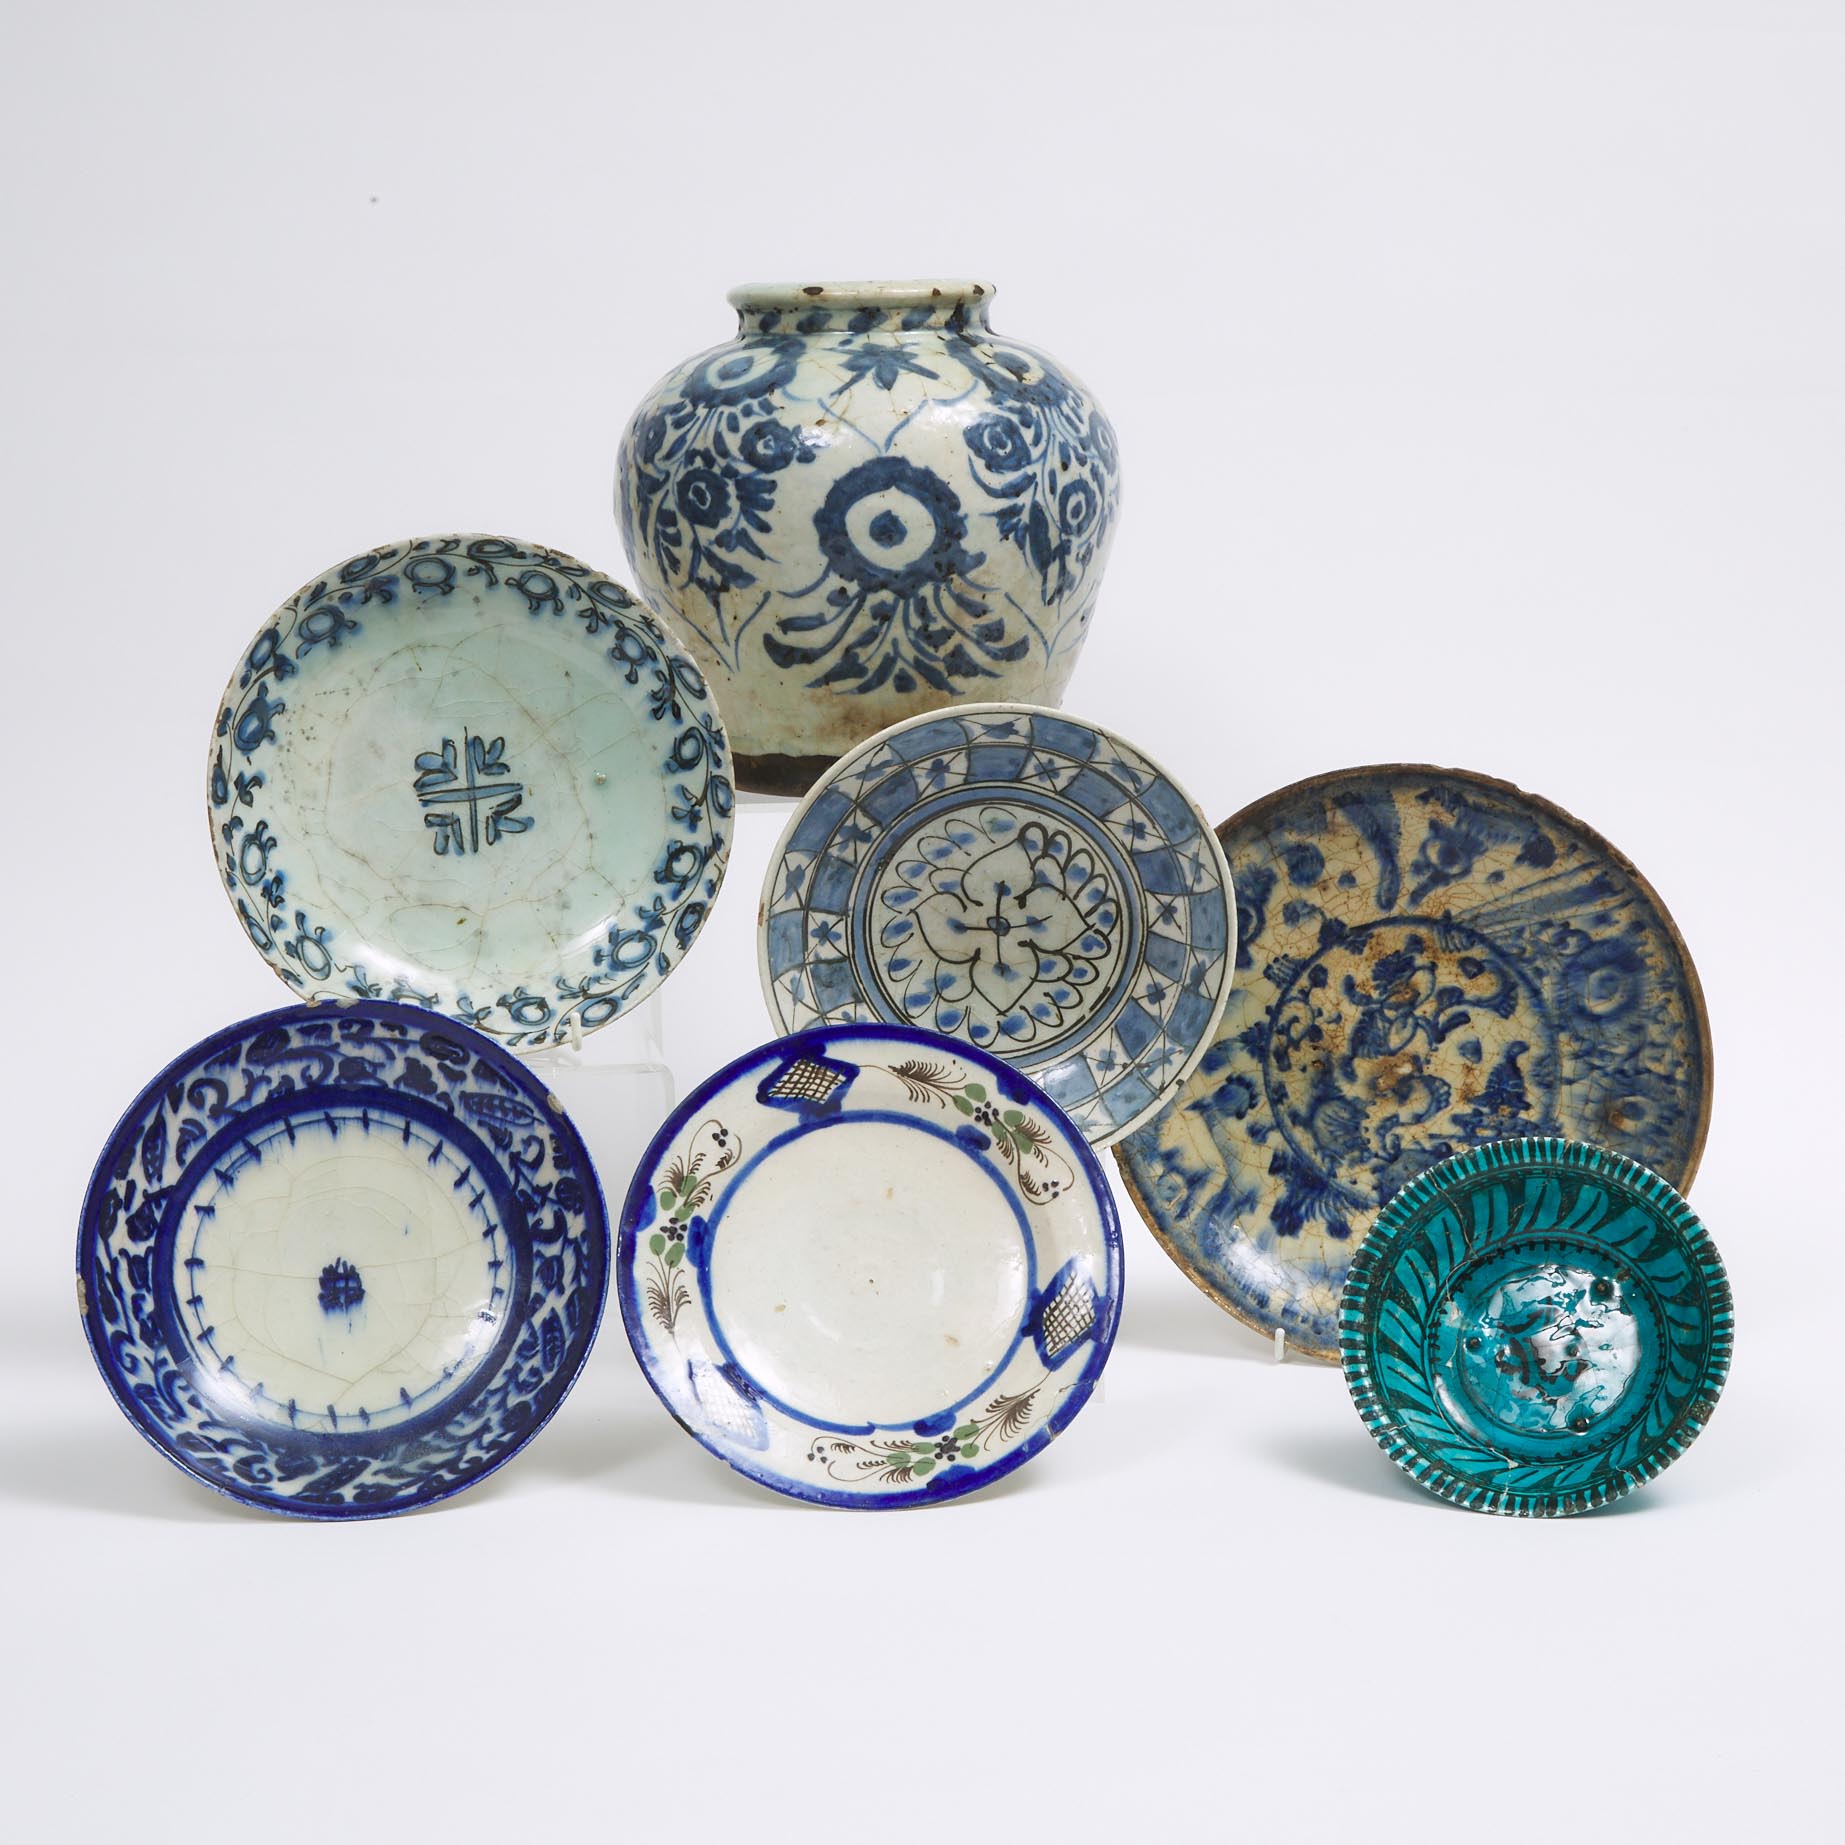 A Group of Seven Persian Ceramics, 16th Century and Later